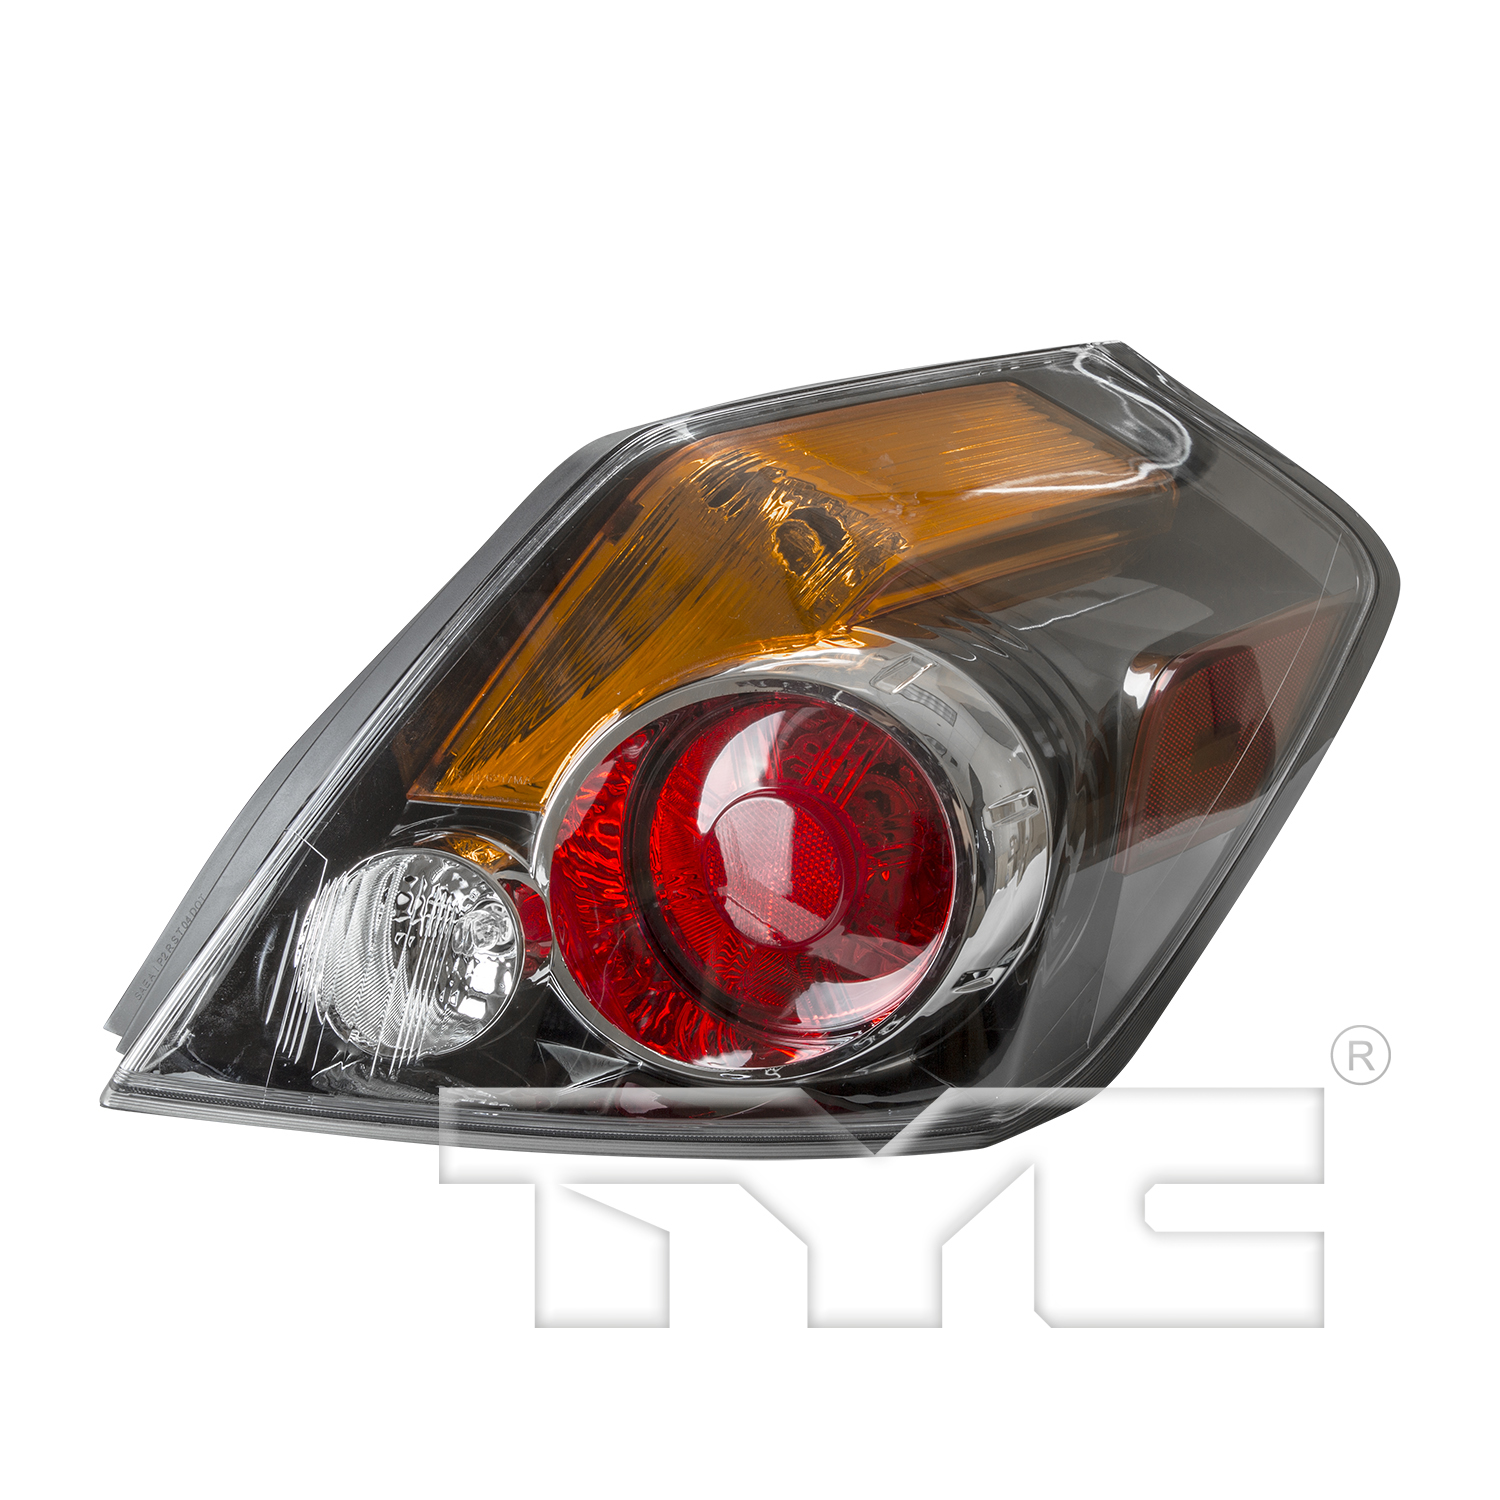 Aftermarket TAILLIGHTS for NISSAN - ALTIMA, ALTIMA,07-09,RT Taillamp assy